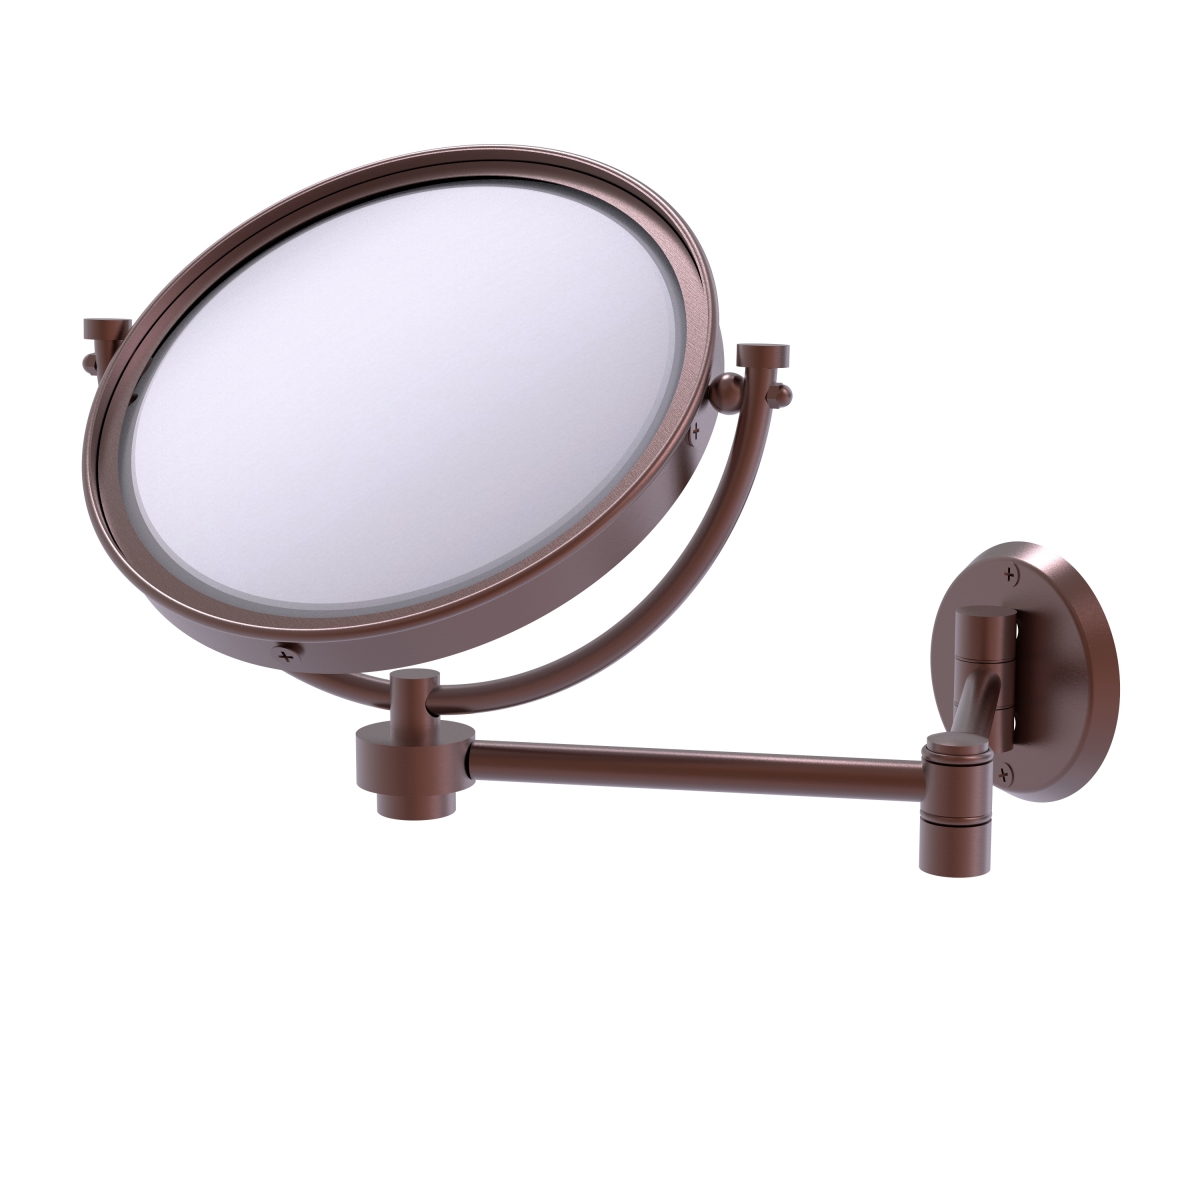 WM-6-5X-CA 8 in. Wall Mounted Extending Make-Up Mirror 5X Magnification, Antique Copper -  Allied Brass, WM-6/5X-CA